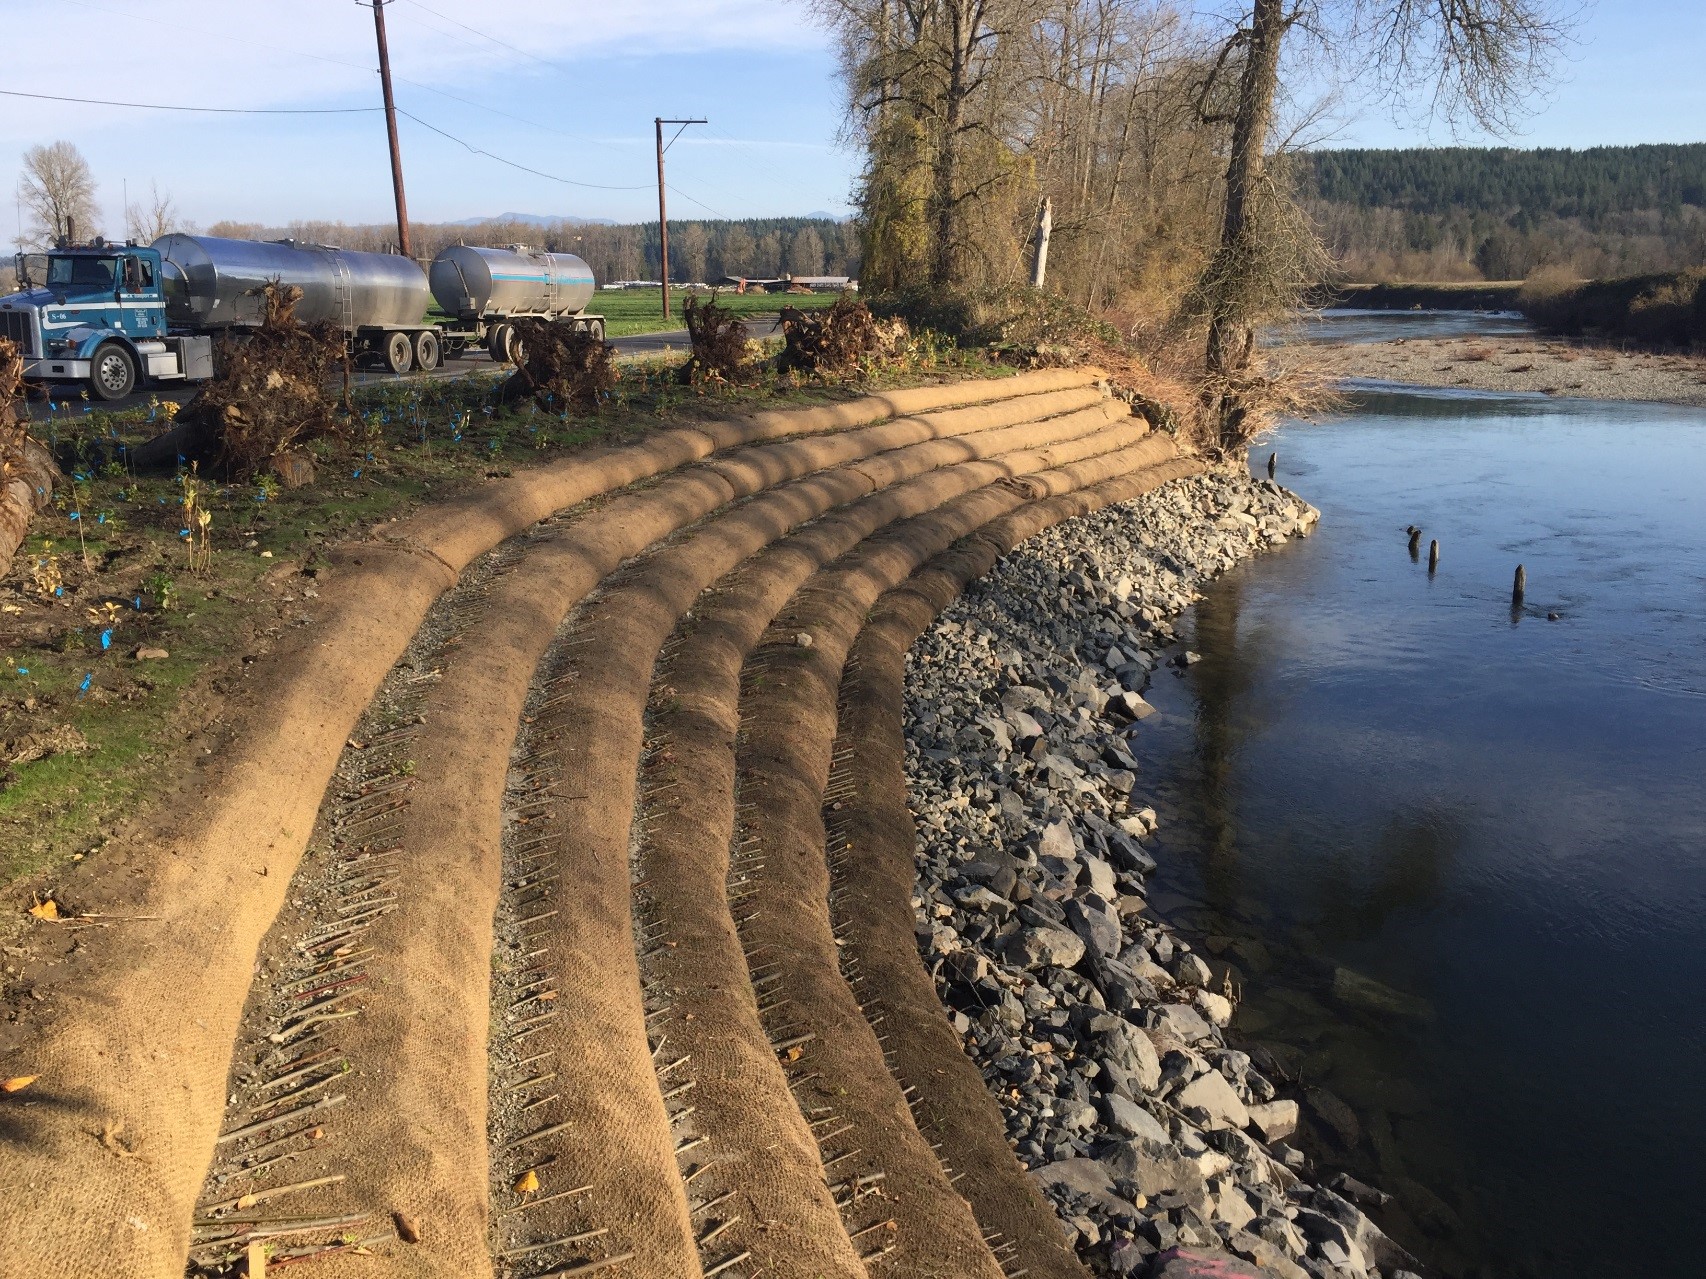 The view, looking downstream, of the SE 19th Way Road Protection Project on the Snoqualmie River.